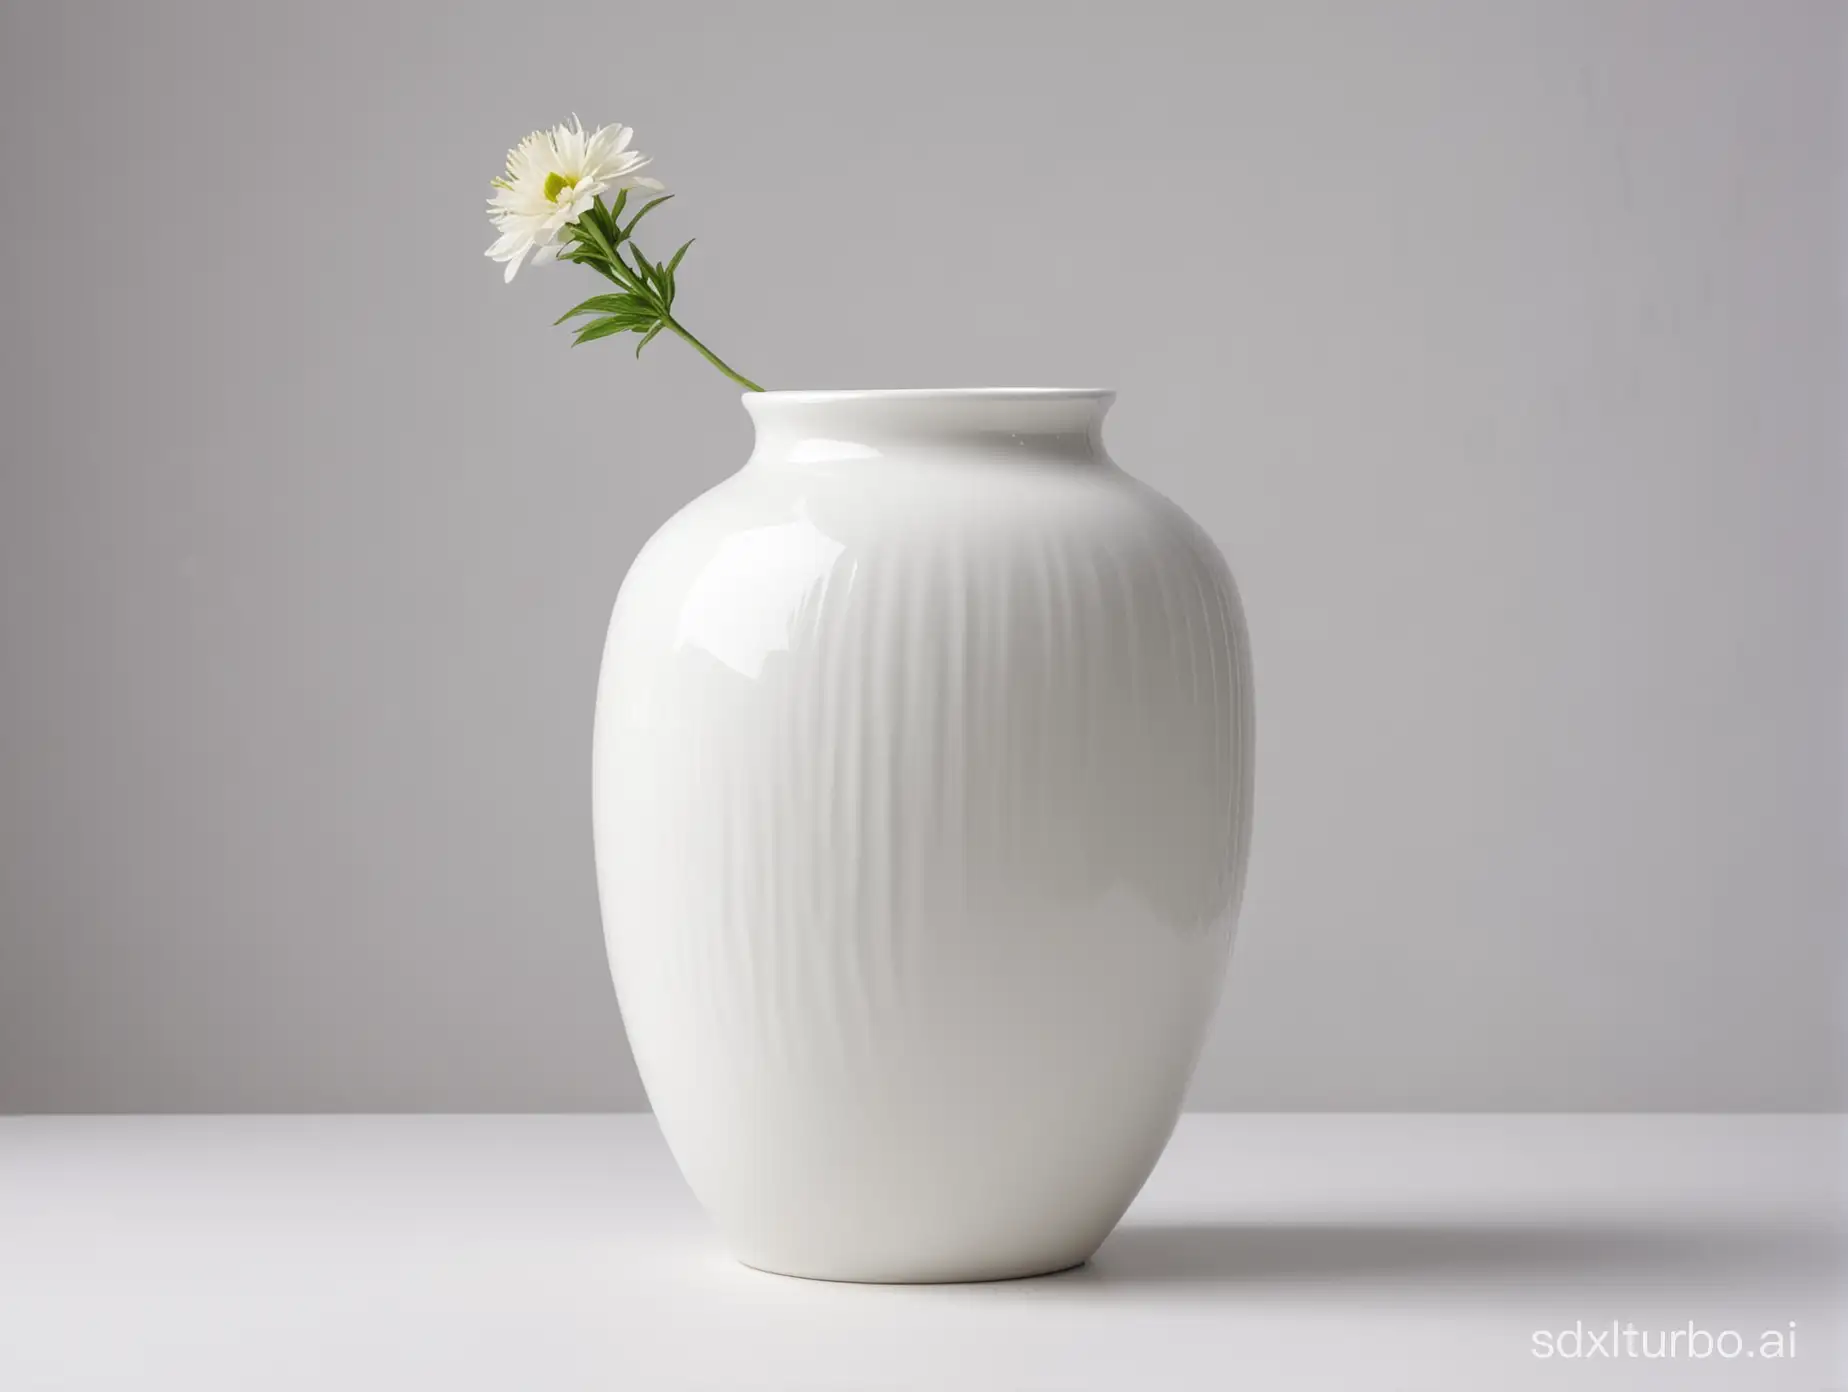 White porcelain vase, bright background, frontal view